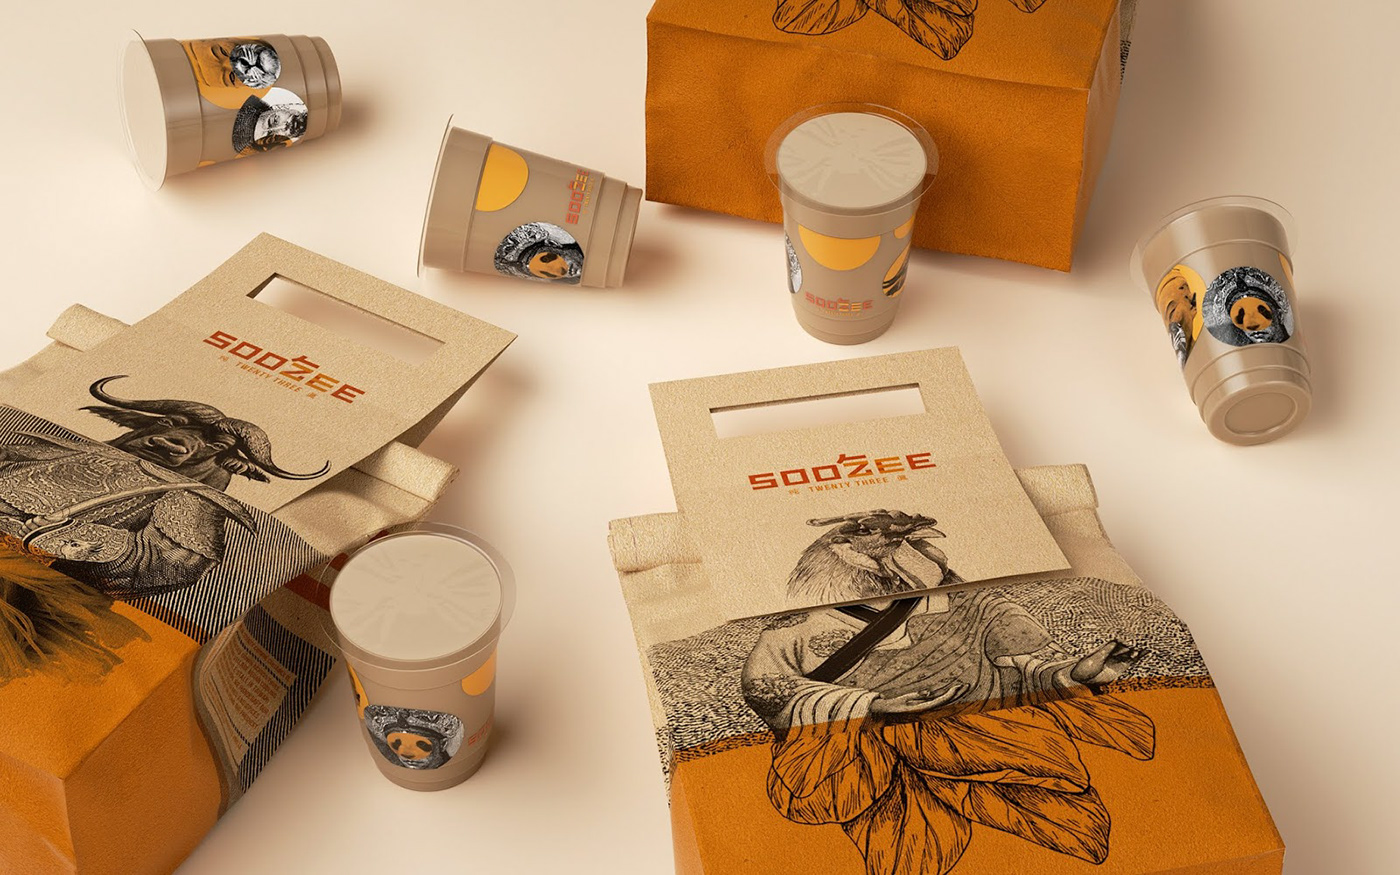 product package packaging design brand identity Graphic Designer visual identity Brand Design identity brand design amazon packaging box